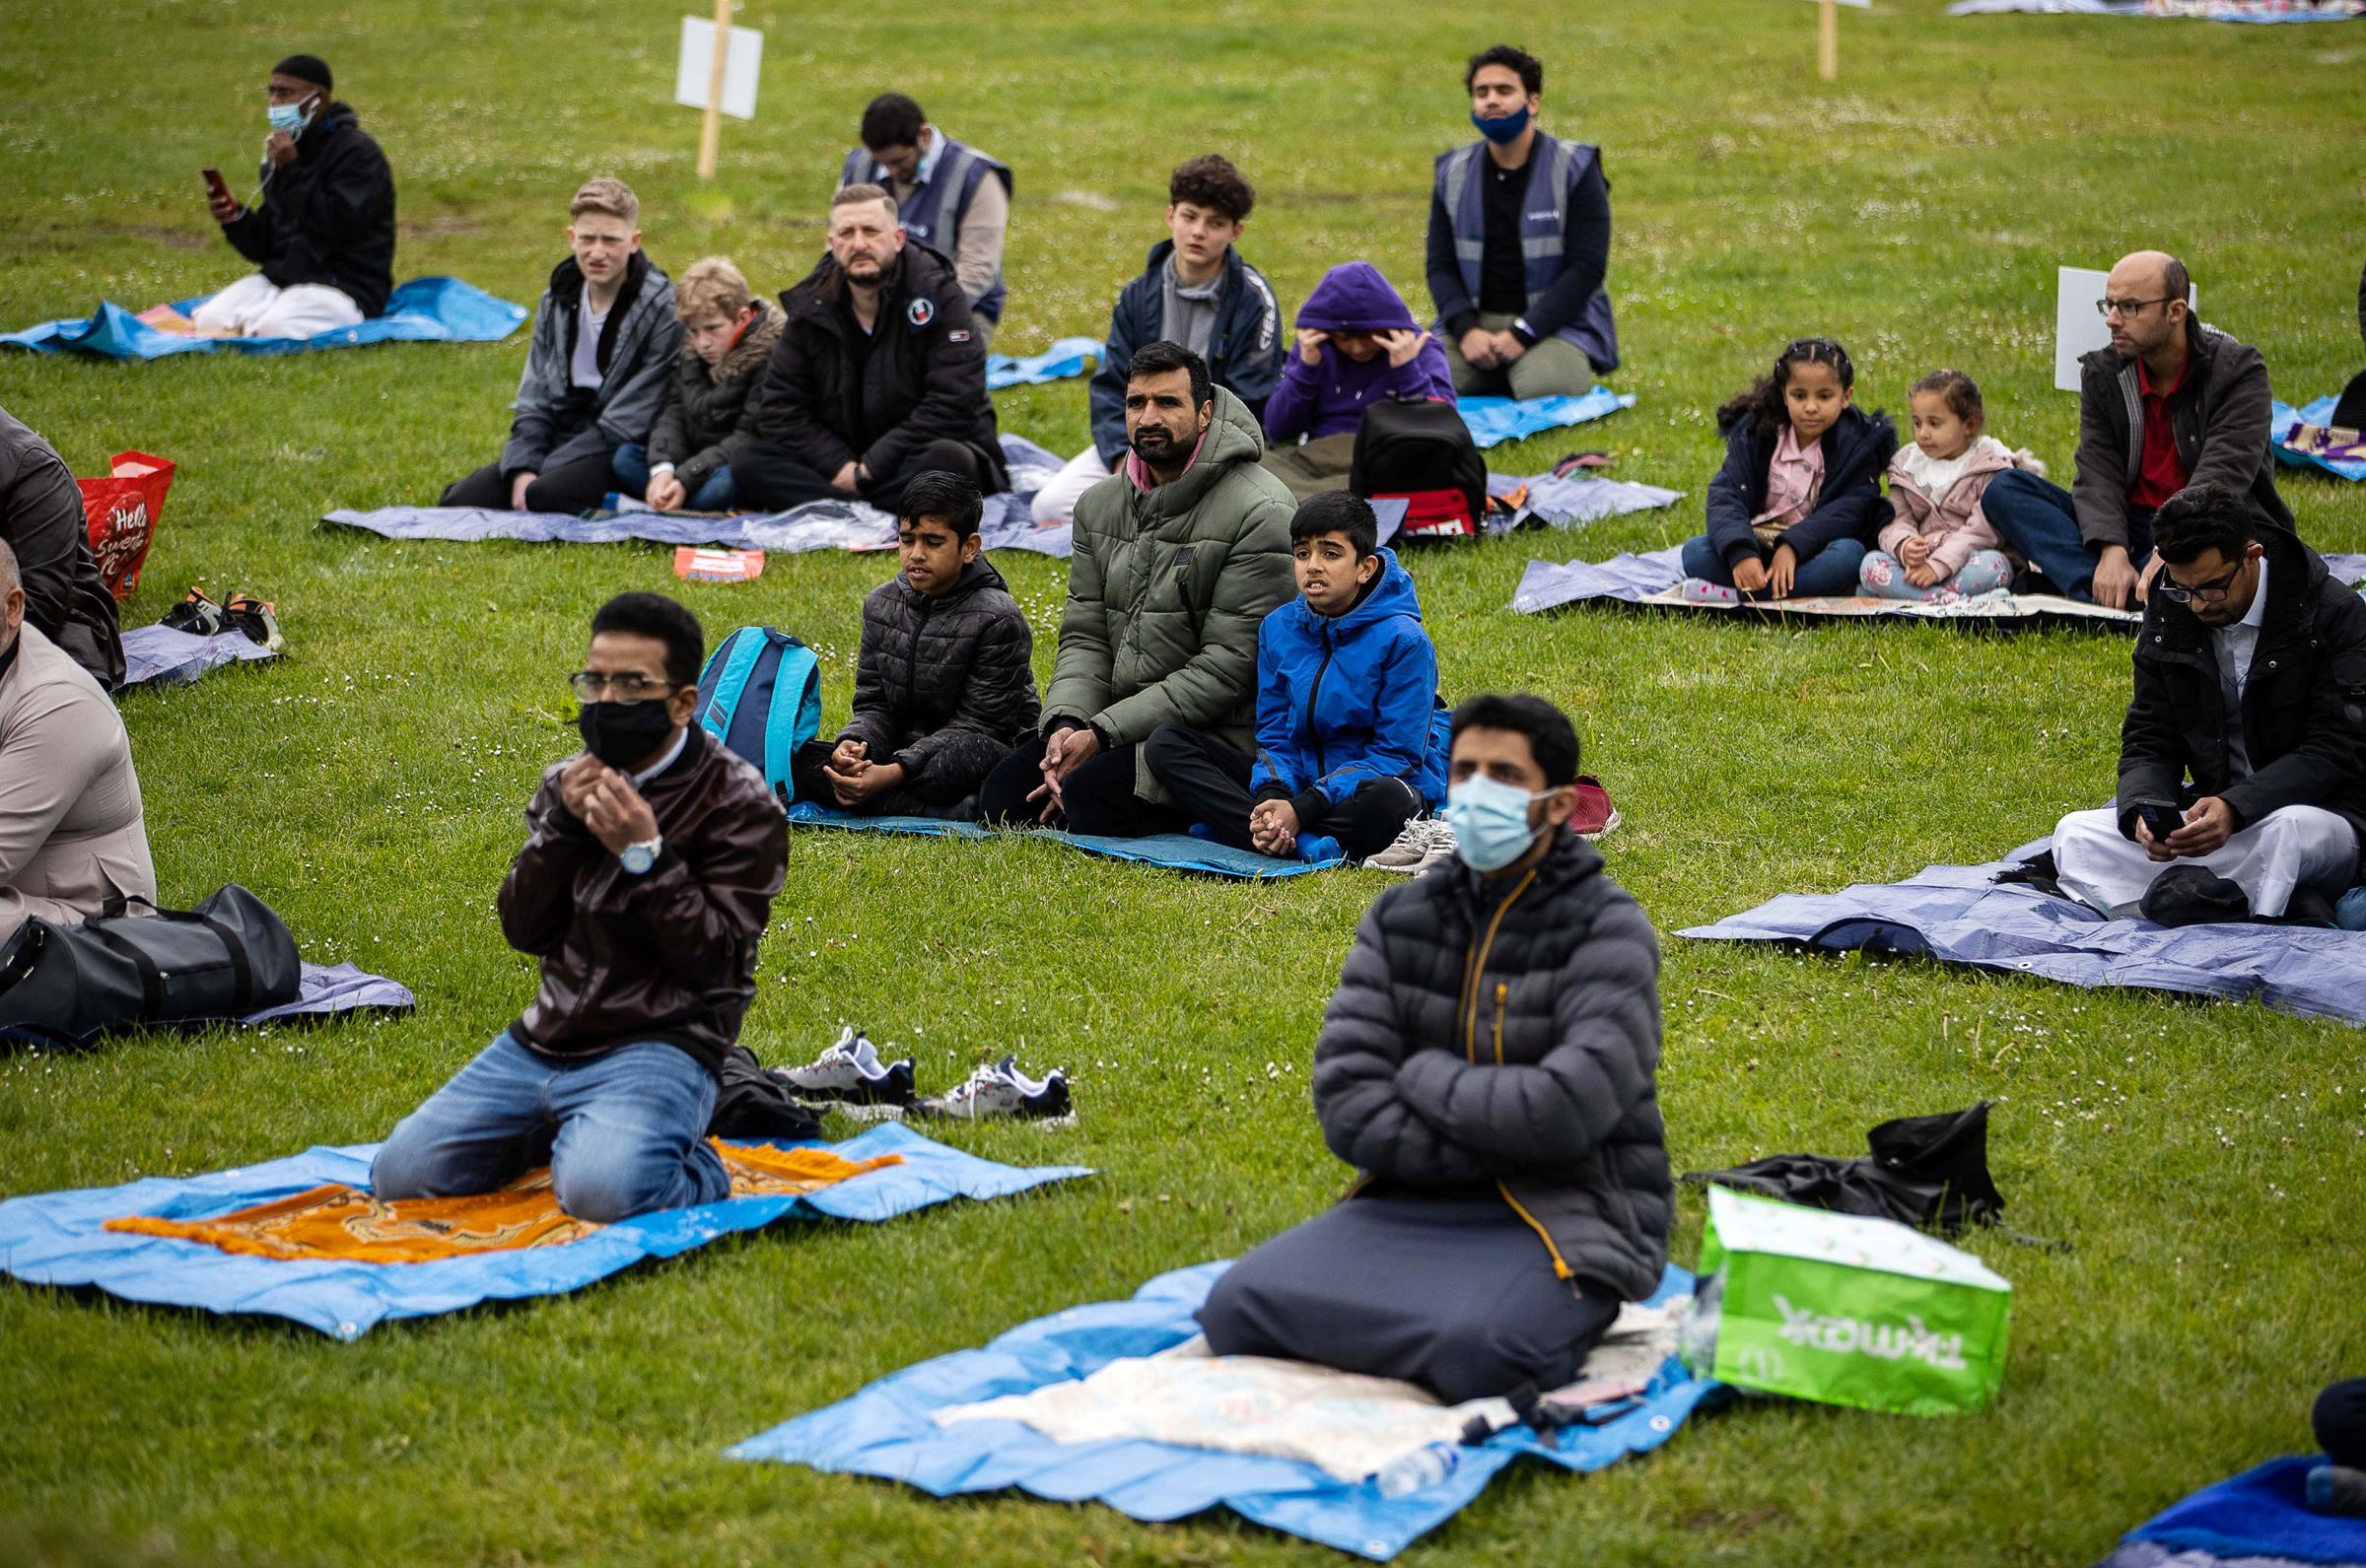 13.05.21 - Picture shows Eid-al-Fitr taking part at Cardiff Castle, Wales, which marks the end of Ramadan. The event is being used as a Welsh Government pilot scheme to have people attending events. 95 adults were in attendance, not including children